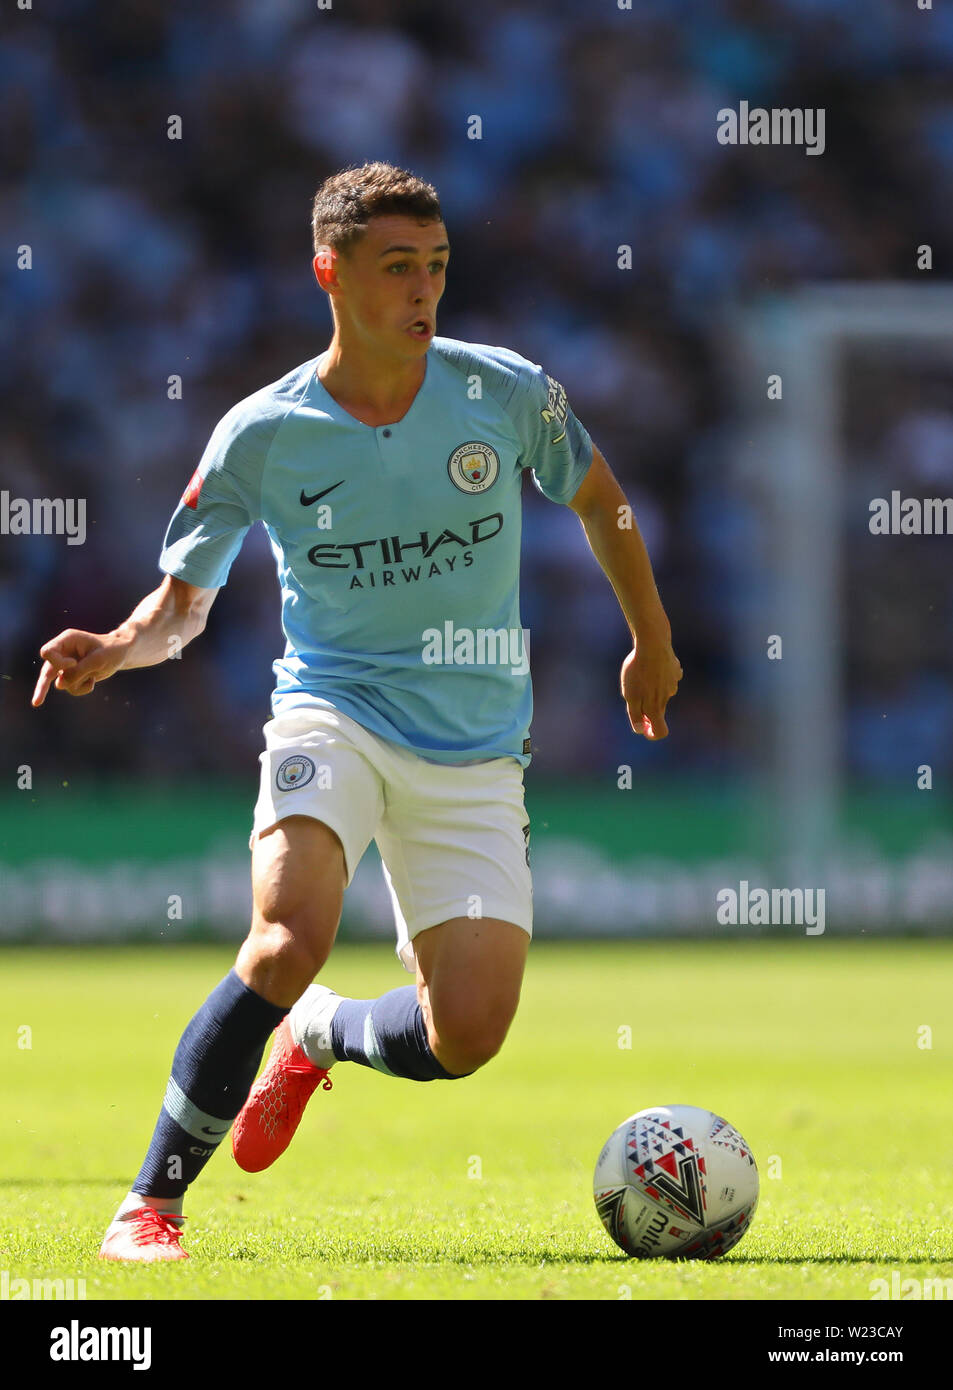 Phil Foden of Manchester City - Chelsea v Manchester City, FA Community Shield, Wembley Stadium, London (Wembley) - 5th August 2018 Stock Photo